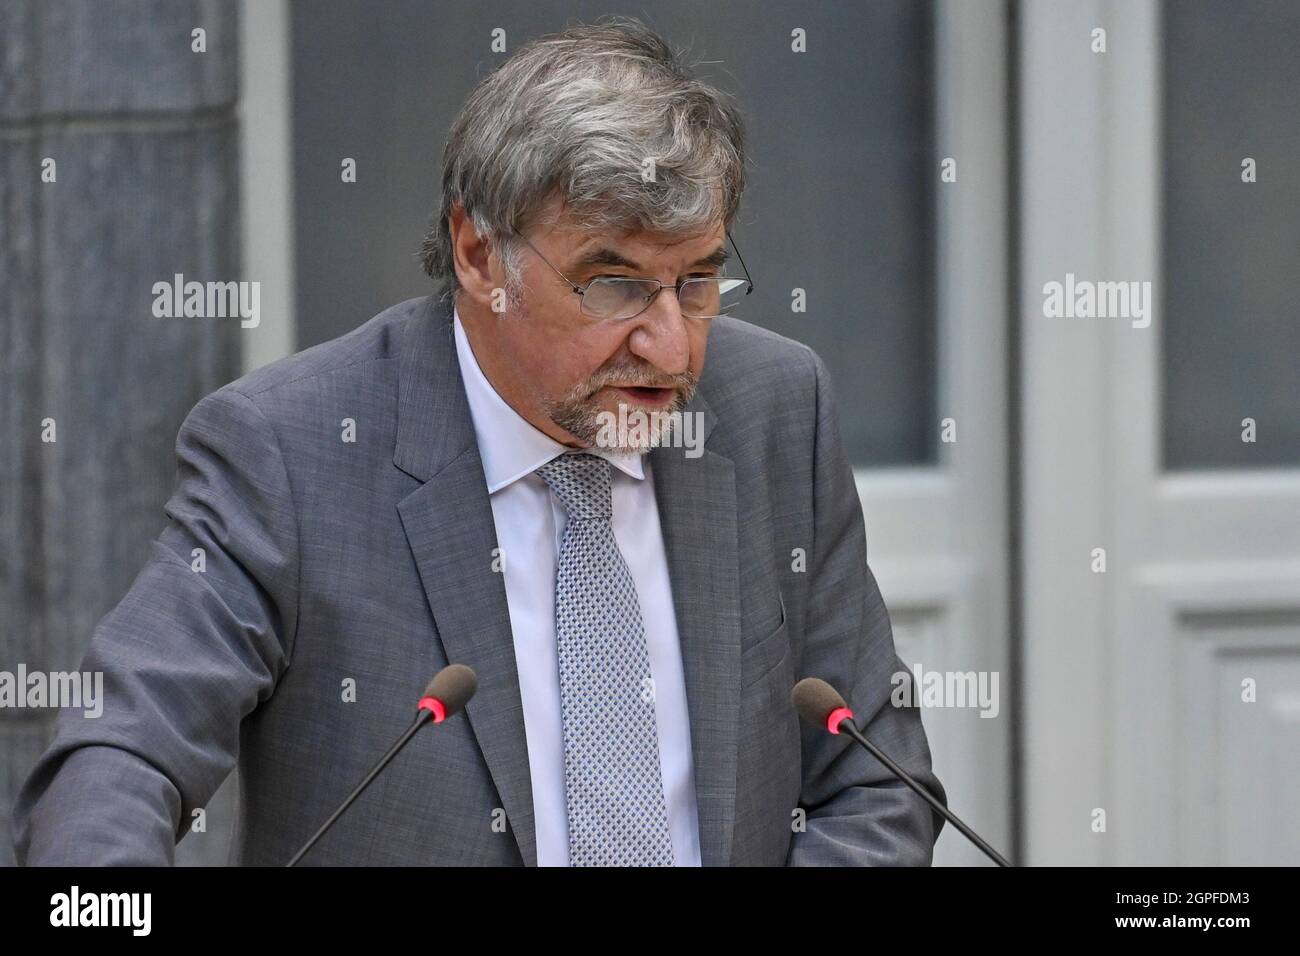 N-VA's group chairman Wilfried Vandaele pictured during a plenary session of the Flemish Parliament to discuss the 'Septemberverklaring', government d Stock Photo